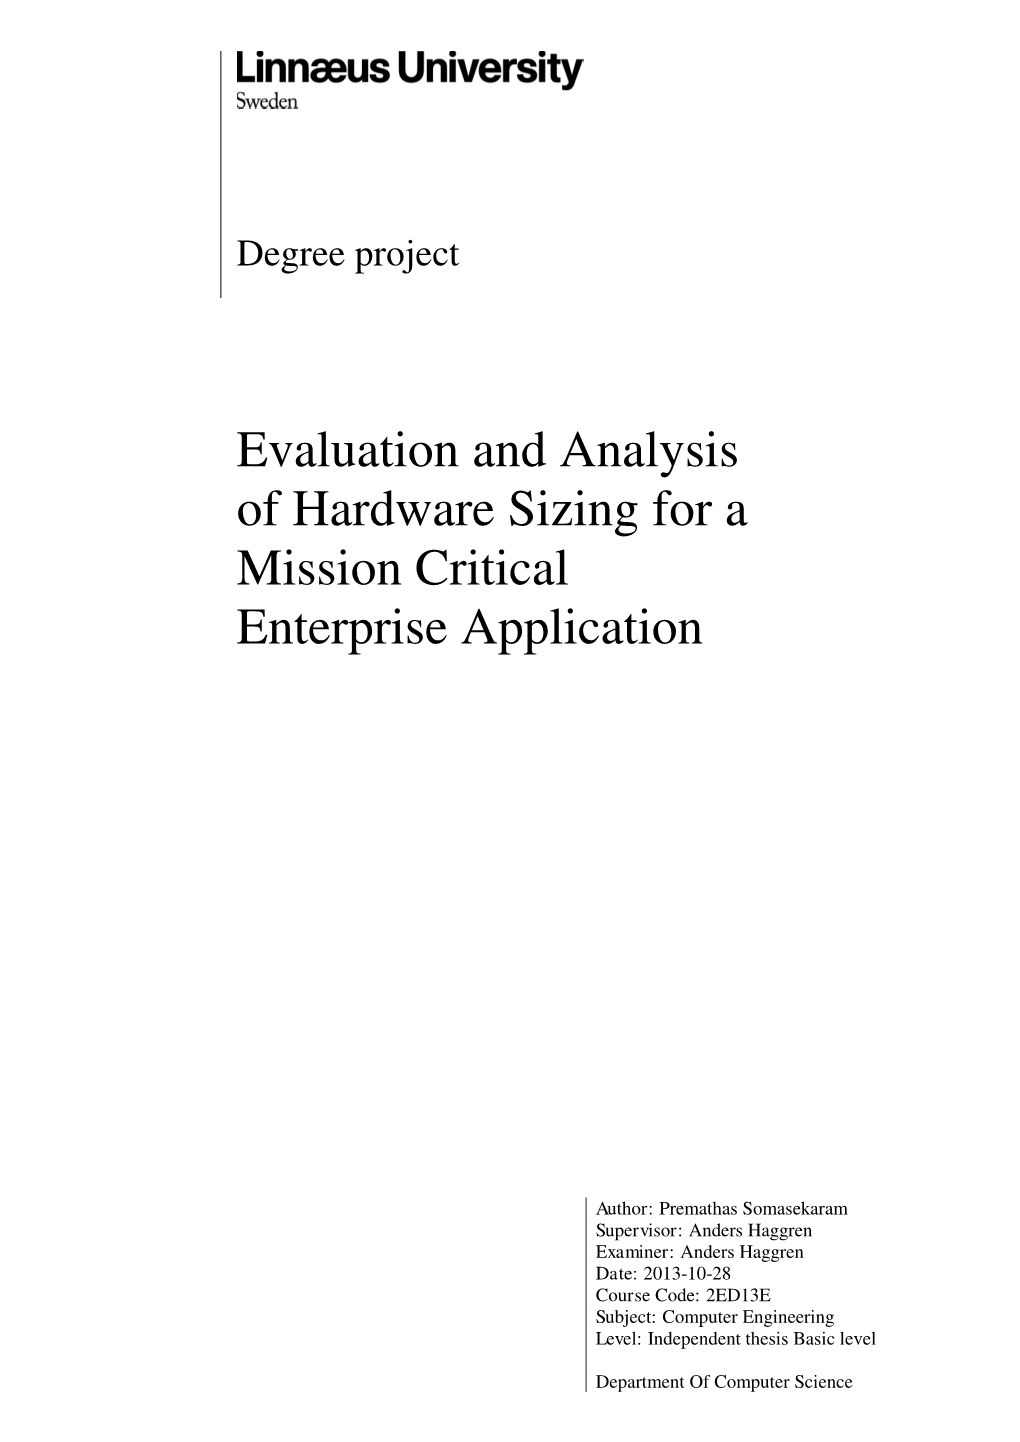 Evaluation and Analysis of Hardware Sizing for a Mission Critical Enterprise Application